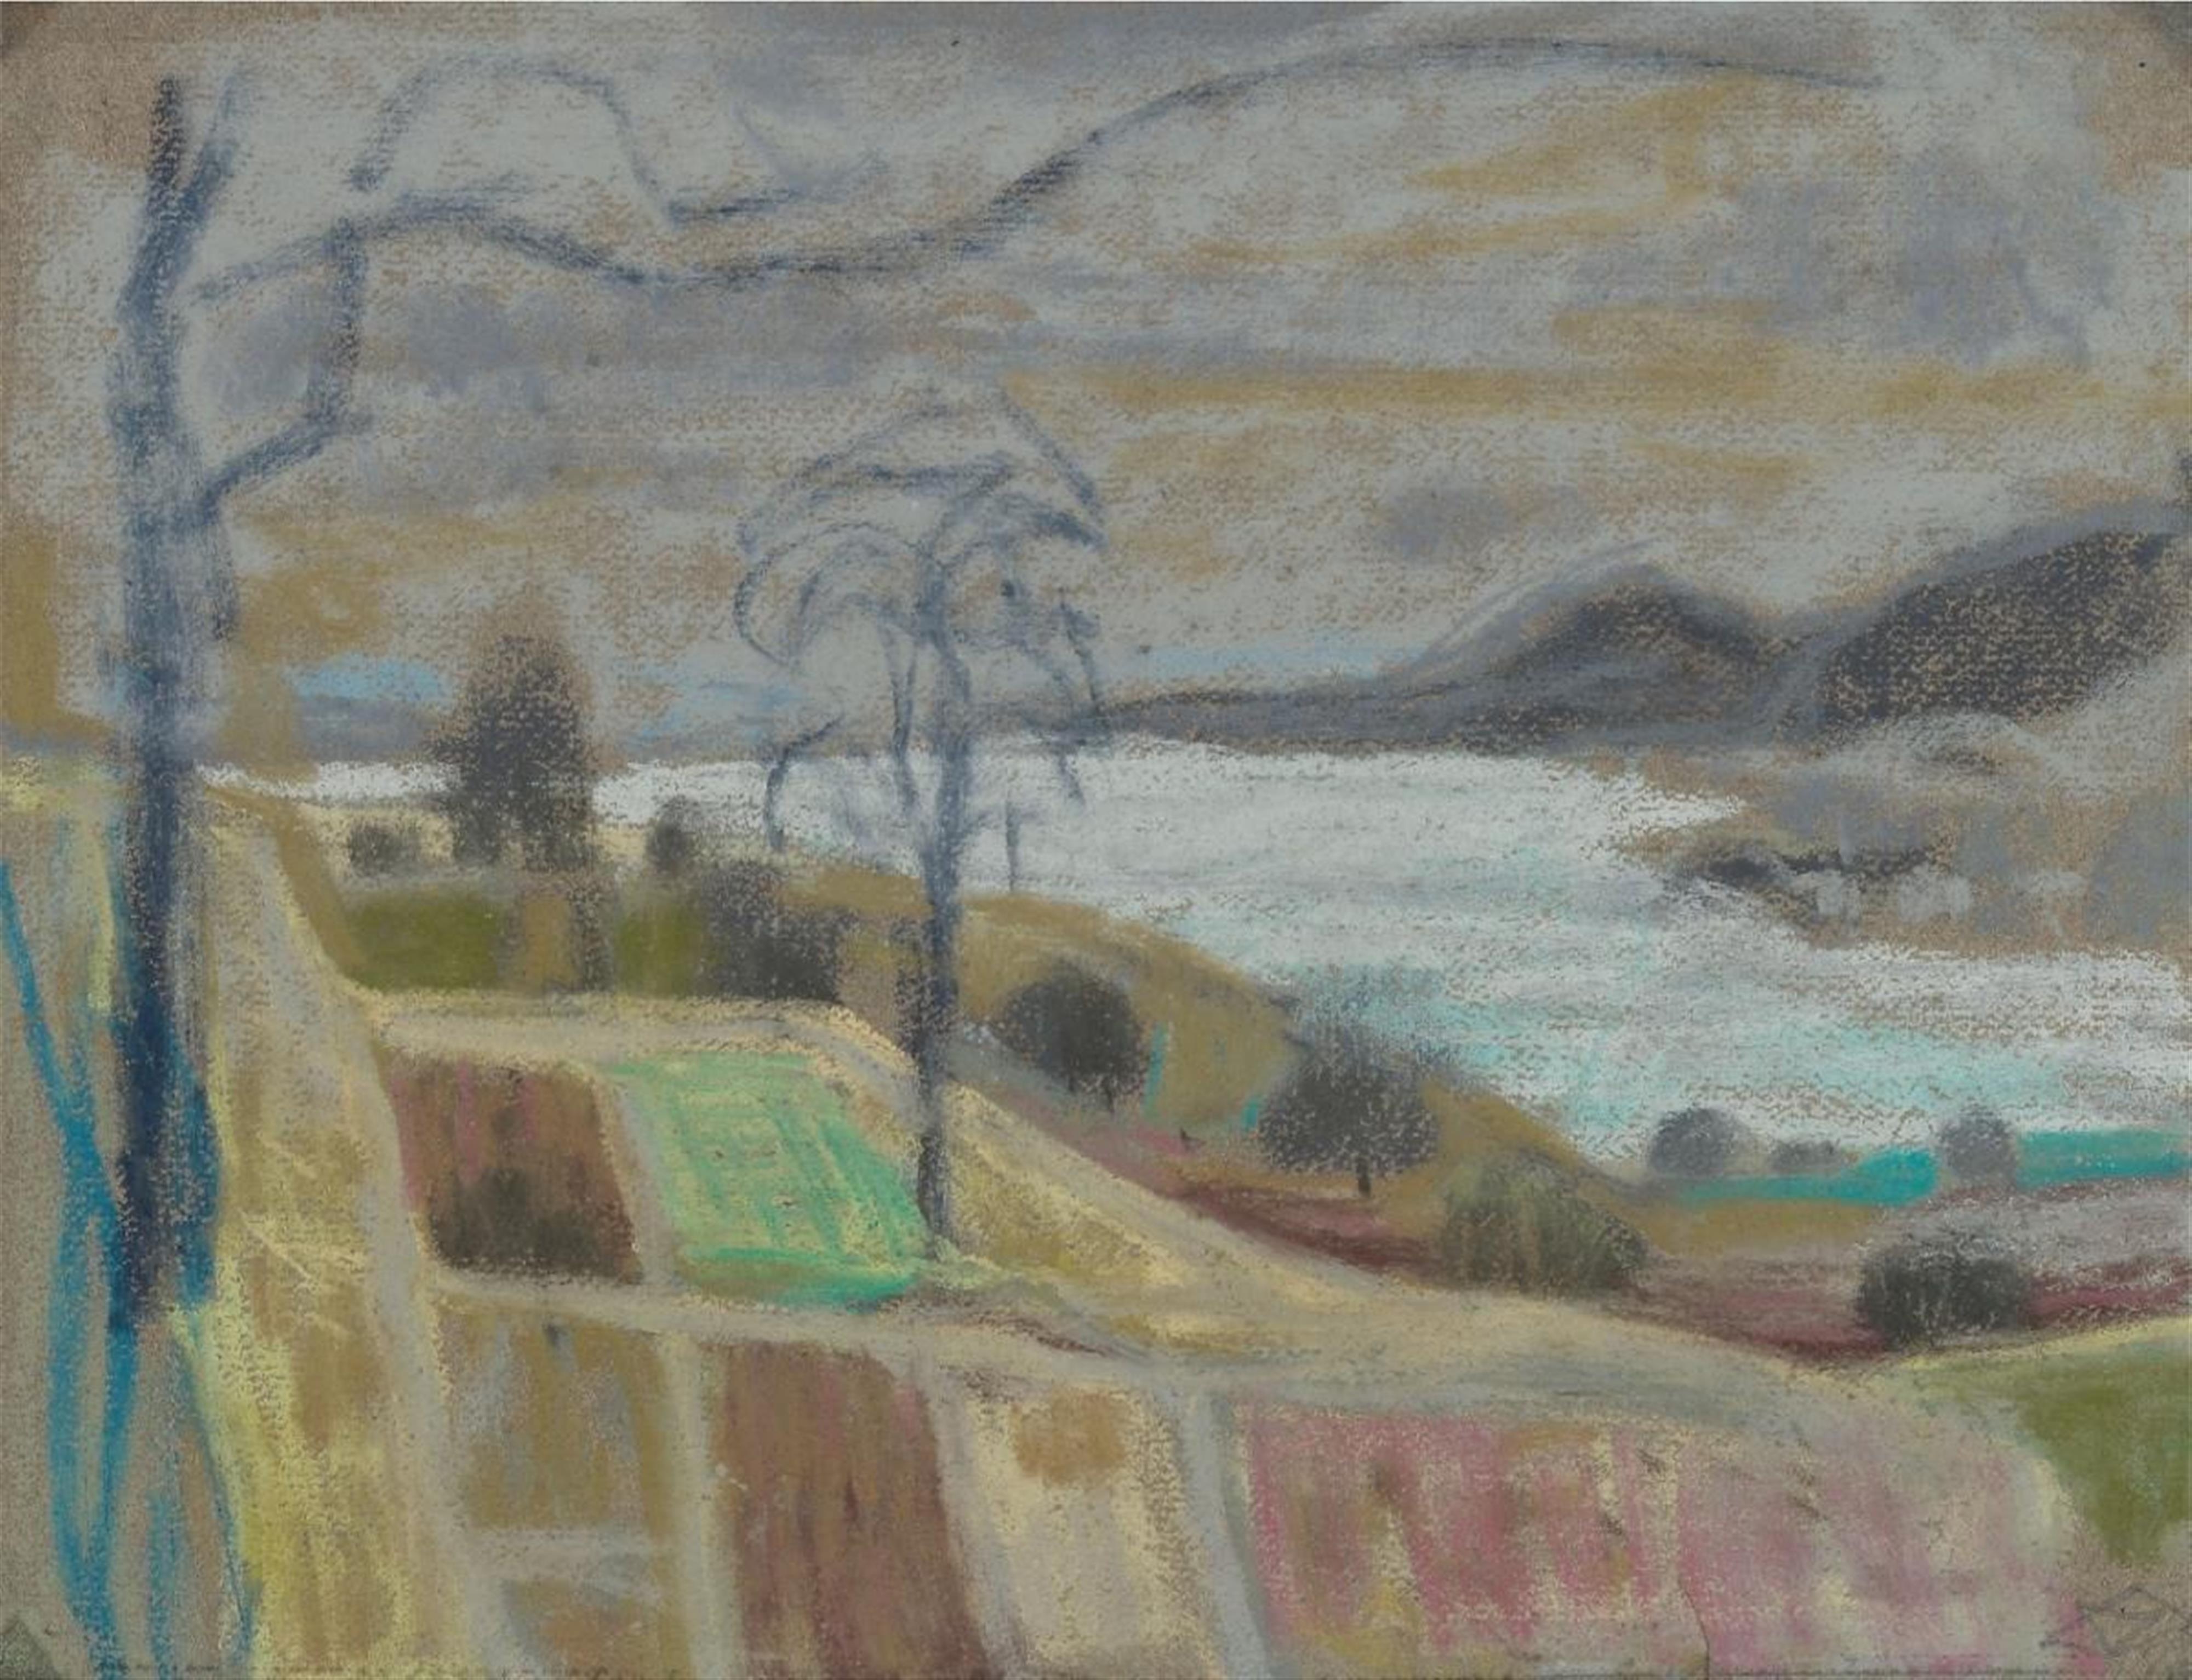 Otto Dix - Vorfrühling am Untersee (Early Spring at the Untersee) - image-1